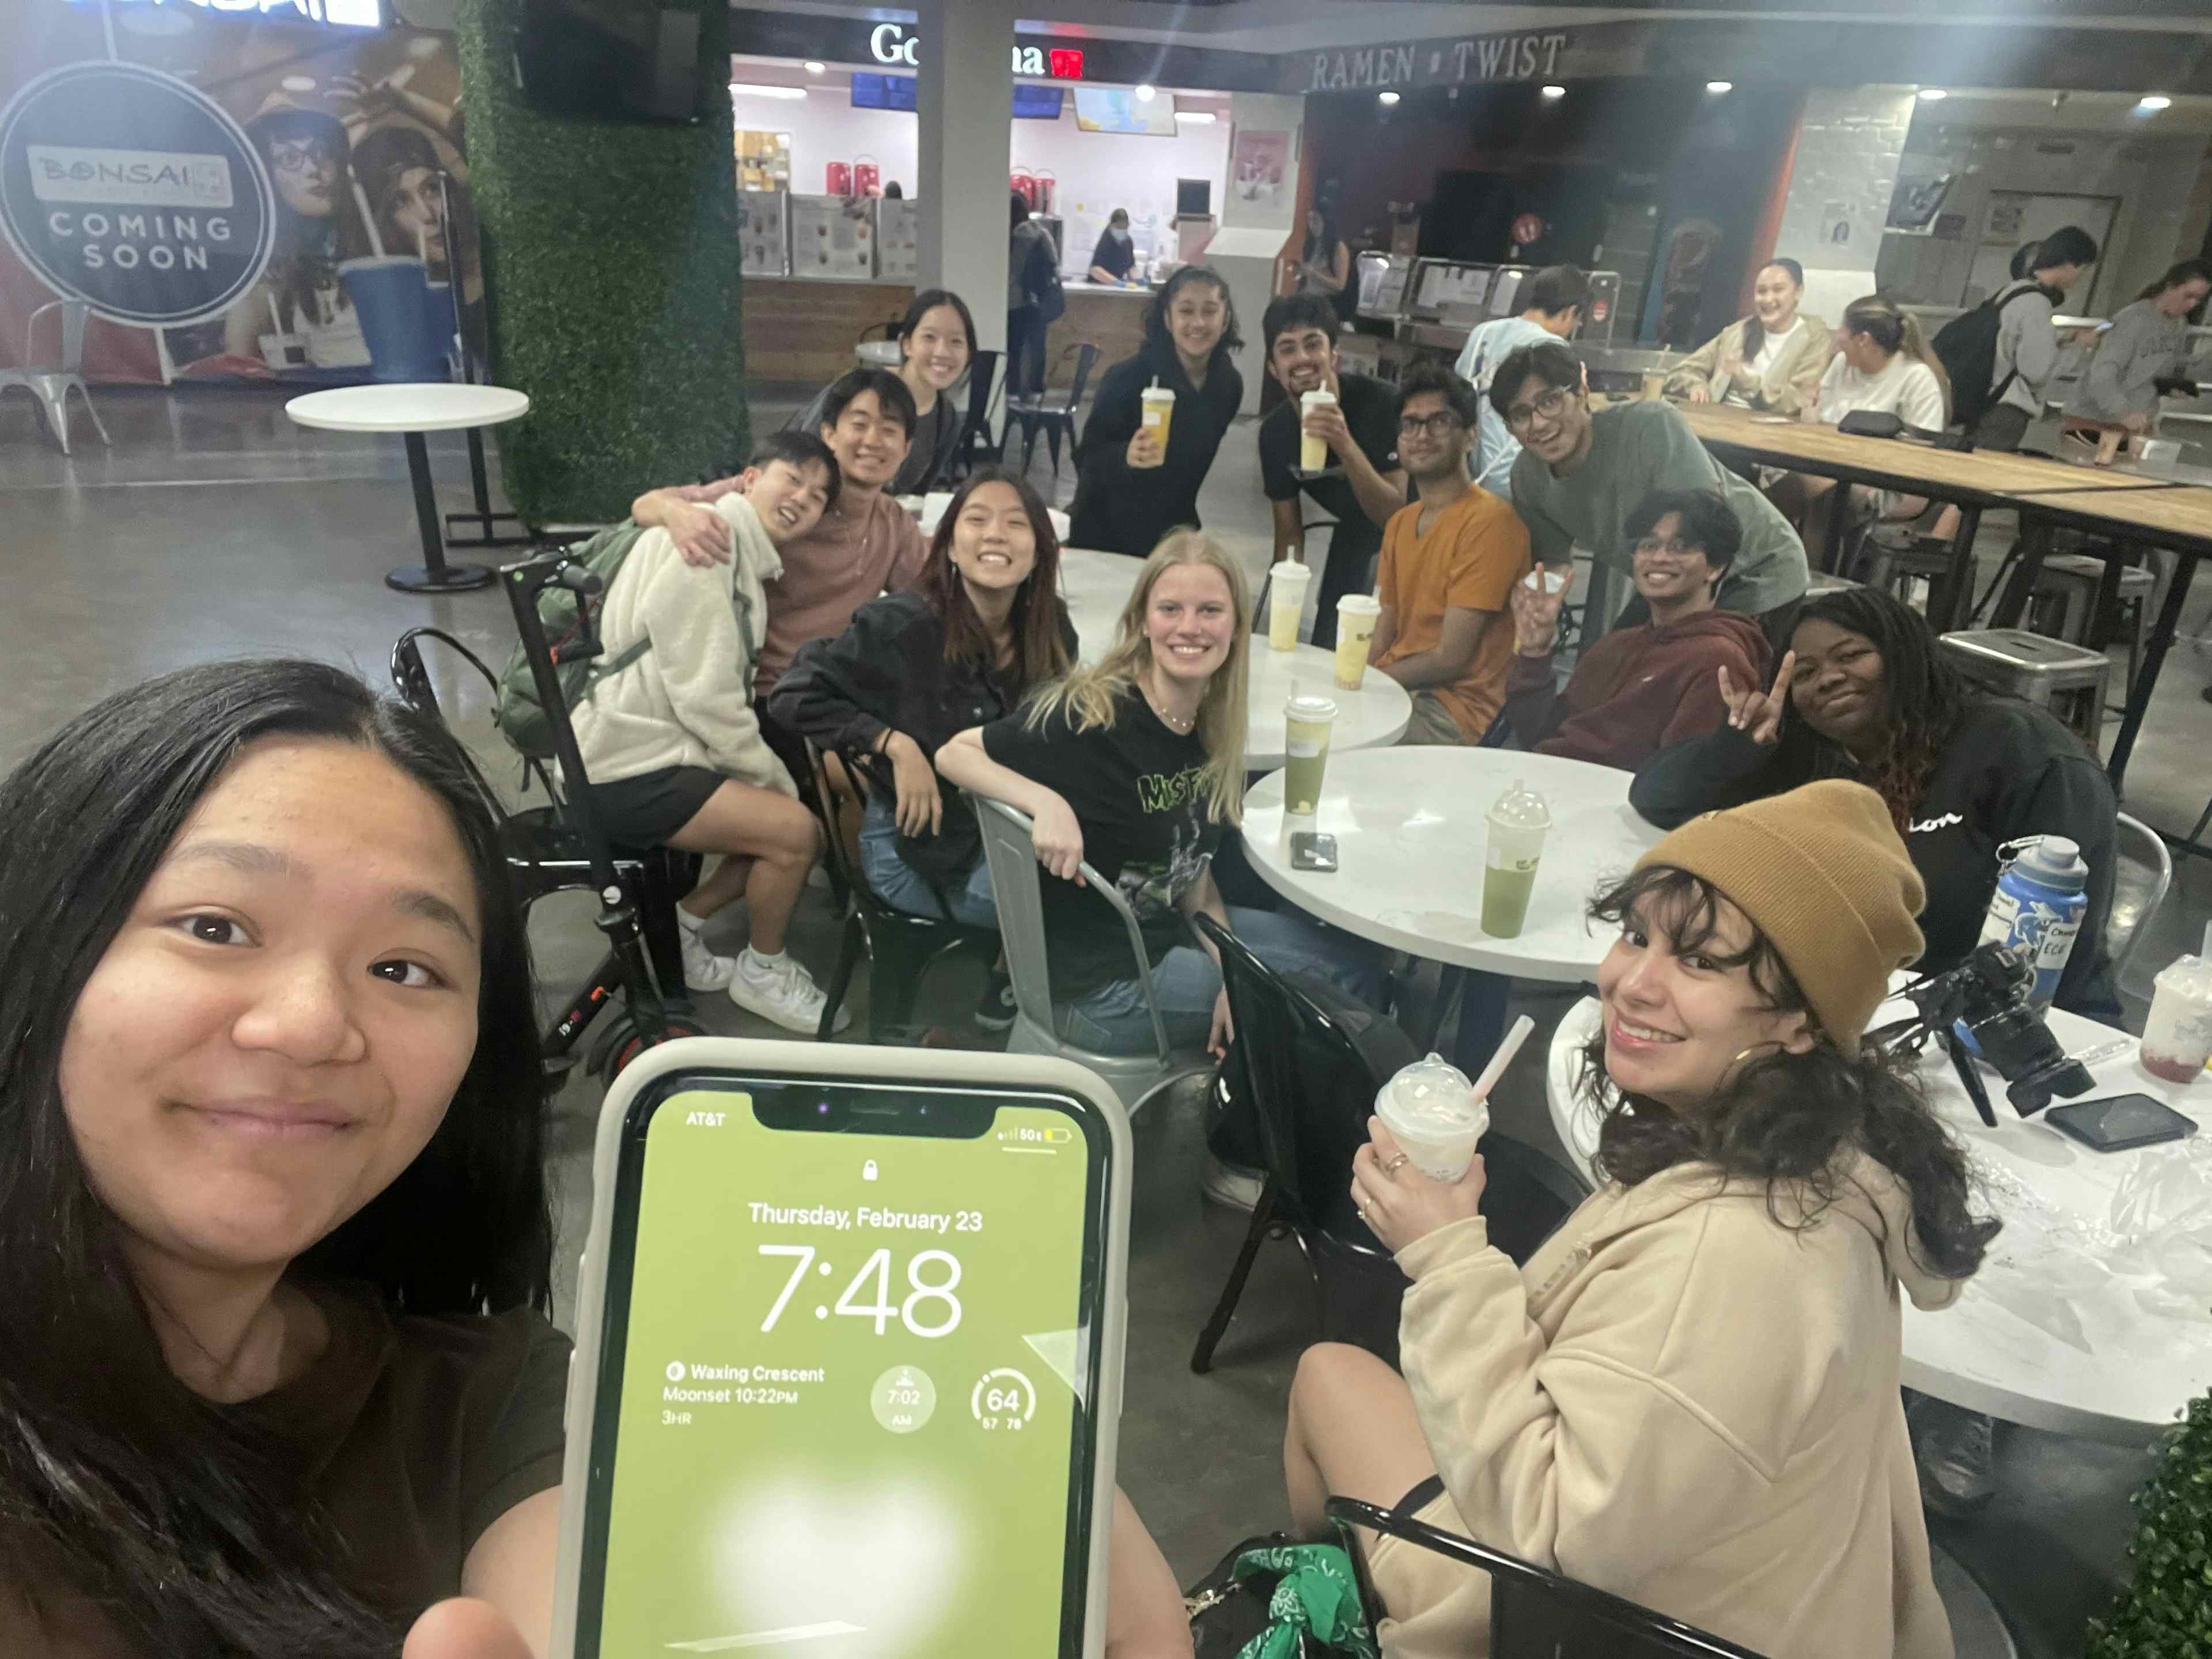 Group photo looks at camera while a member shows their phone's clock to the camera